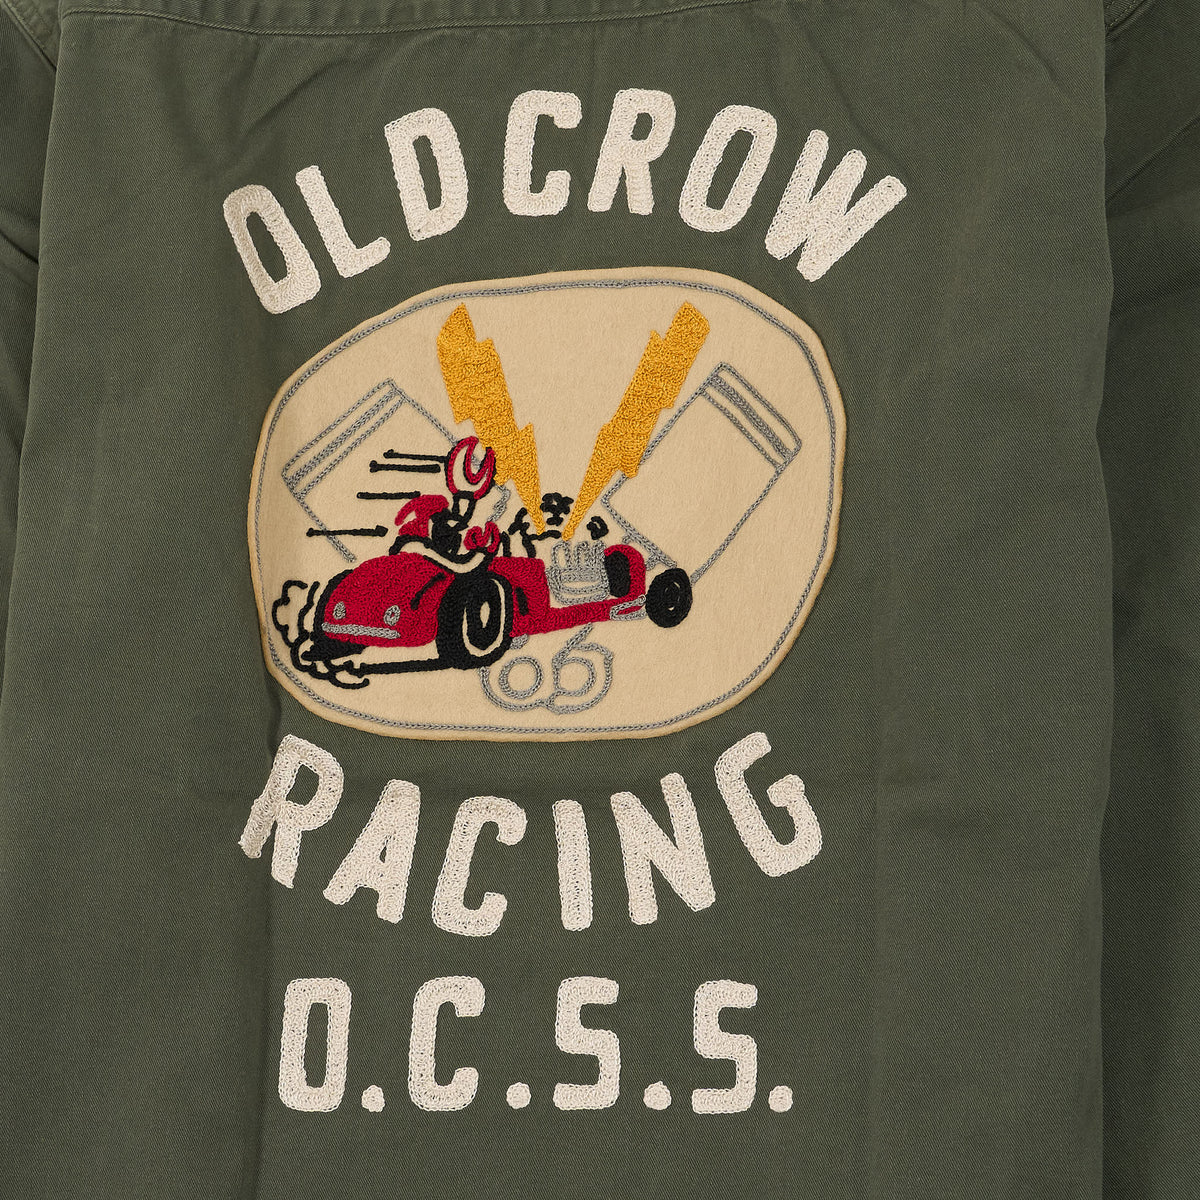 Old Crow Speed Shop by Glad Hand &amp; Co. Work Shirt